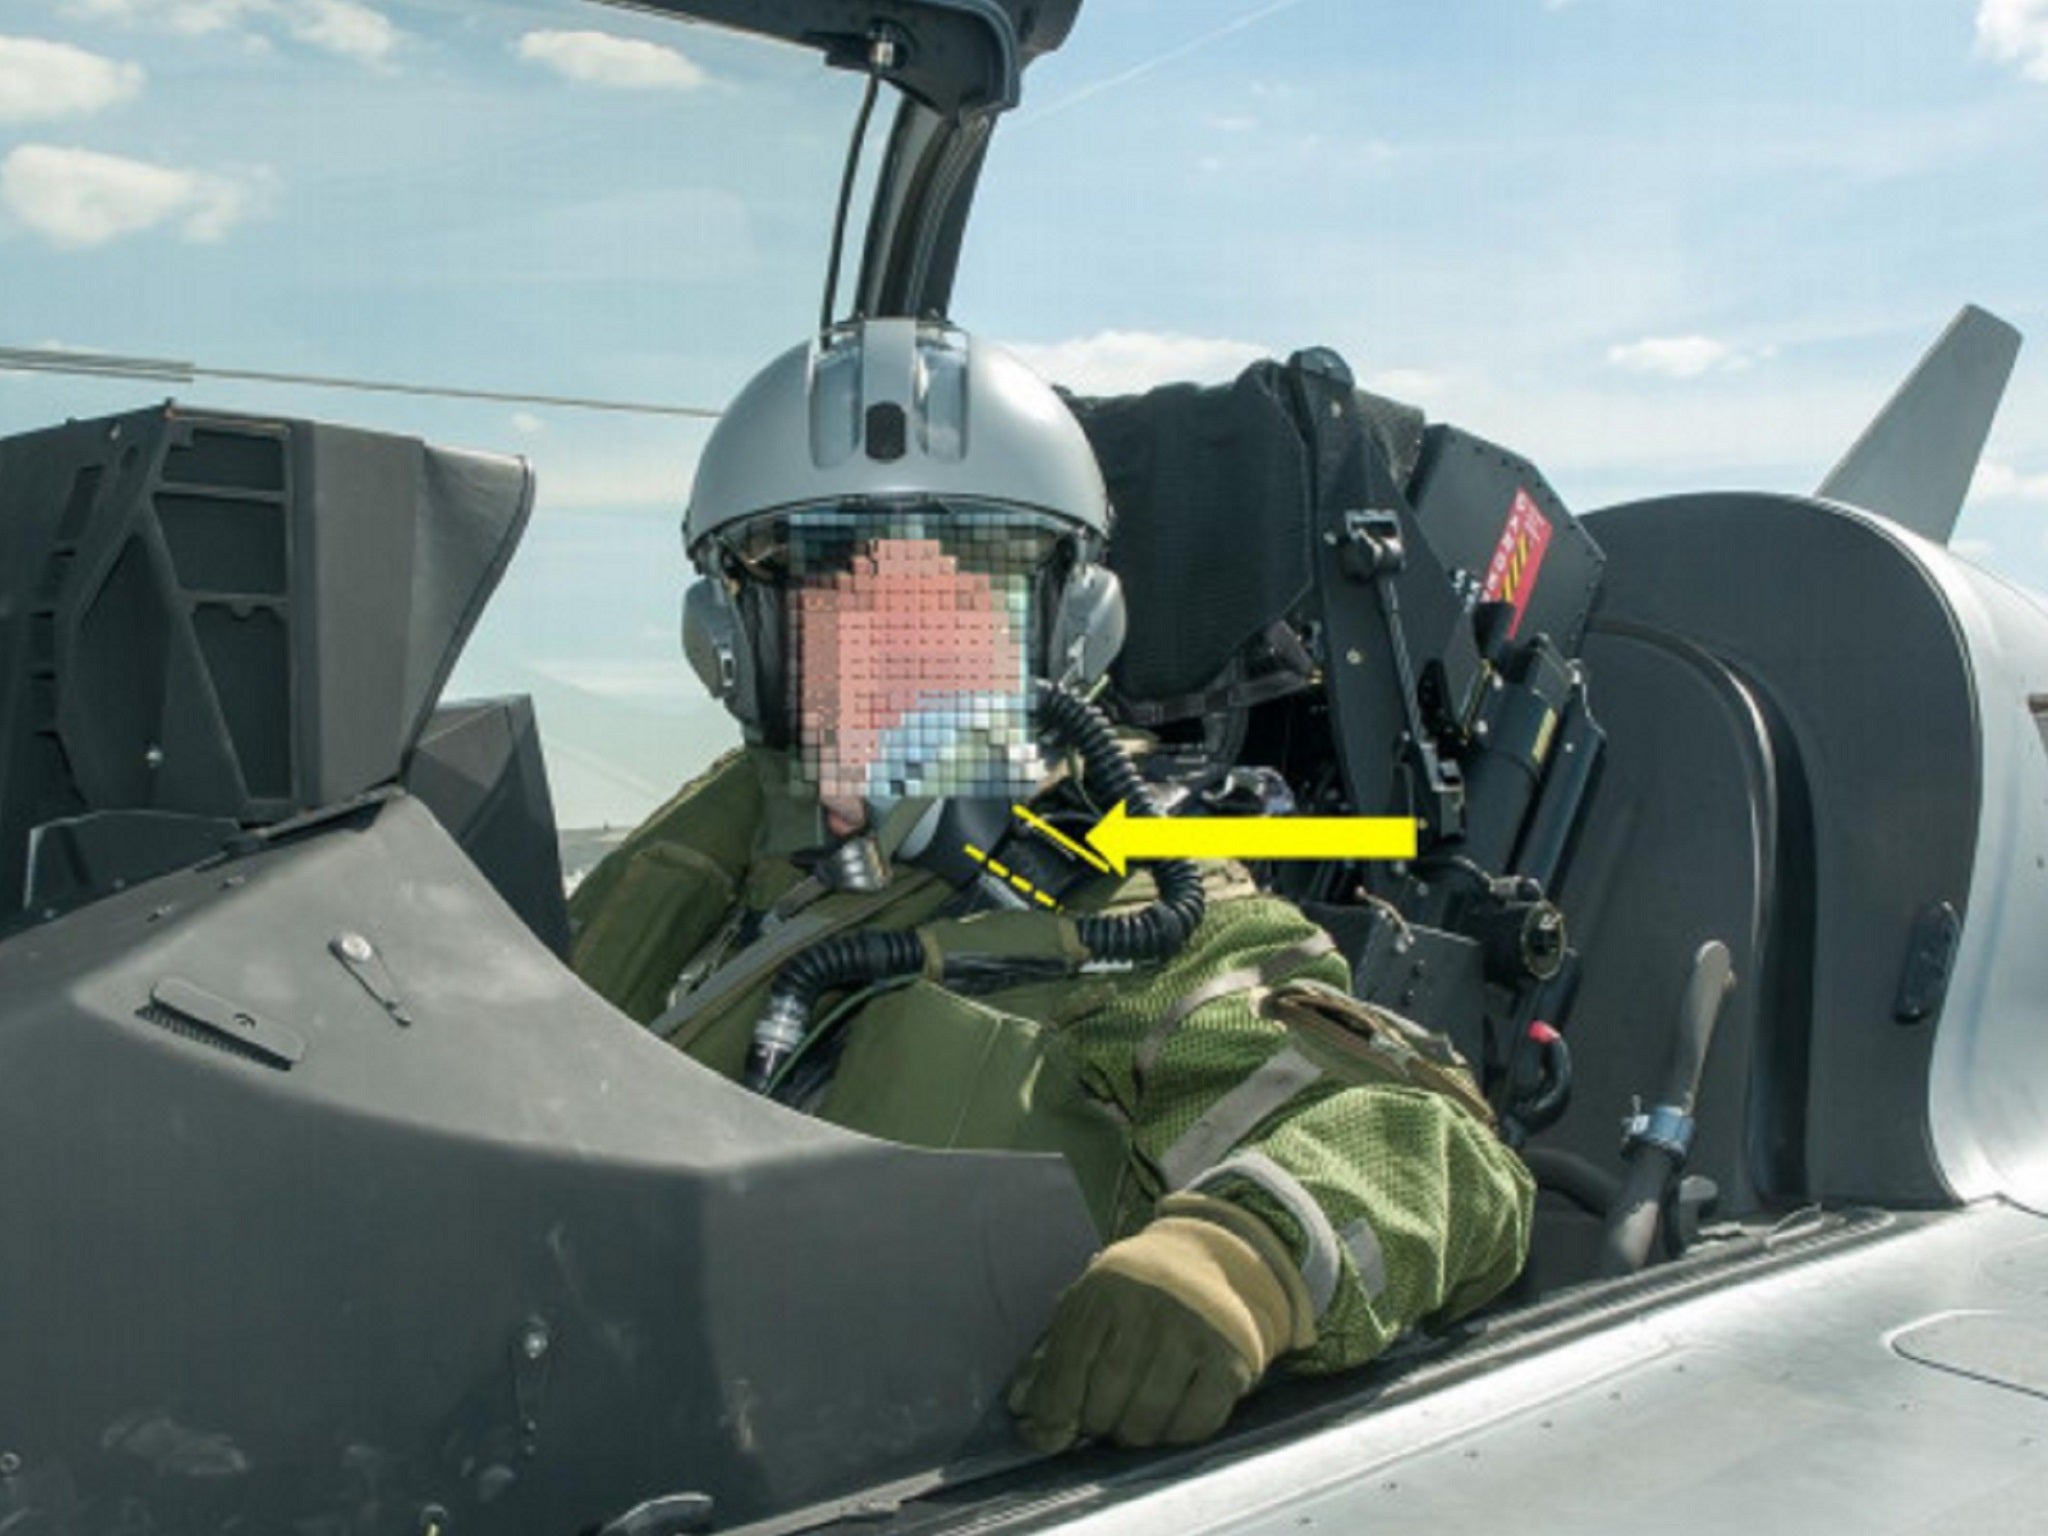 A 64-year-old man accidentally ejected himself from a Dassault Rafale B jet mid-flight near Saint-Dizier, in northeastern France, on 20 March 2019.